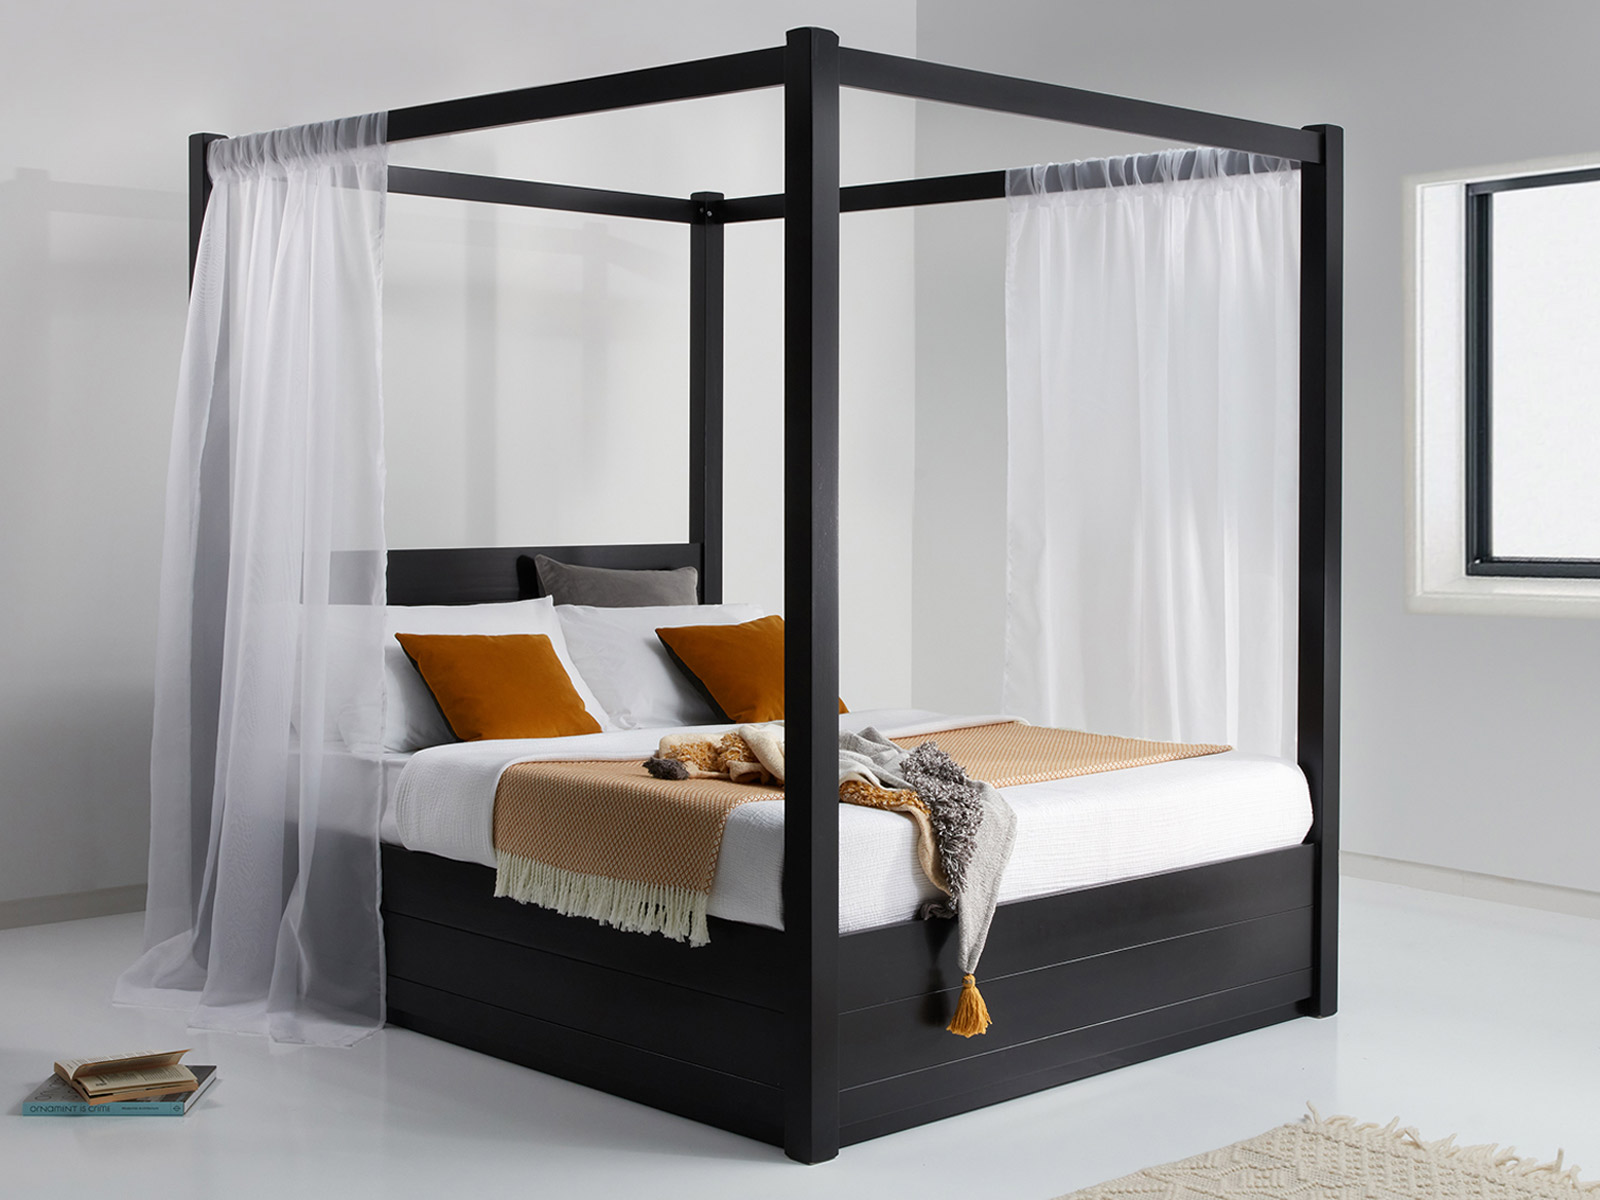 Four Poster Bed Summer Get Laid Beds, How To Put A Canopy On Four Poster Bed